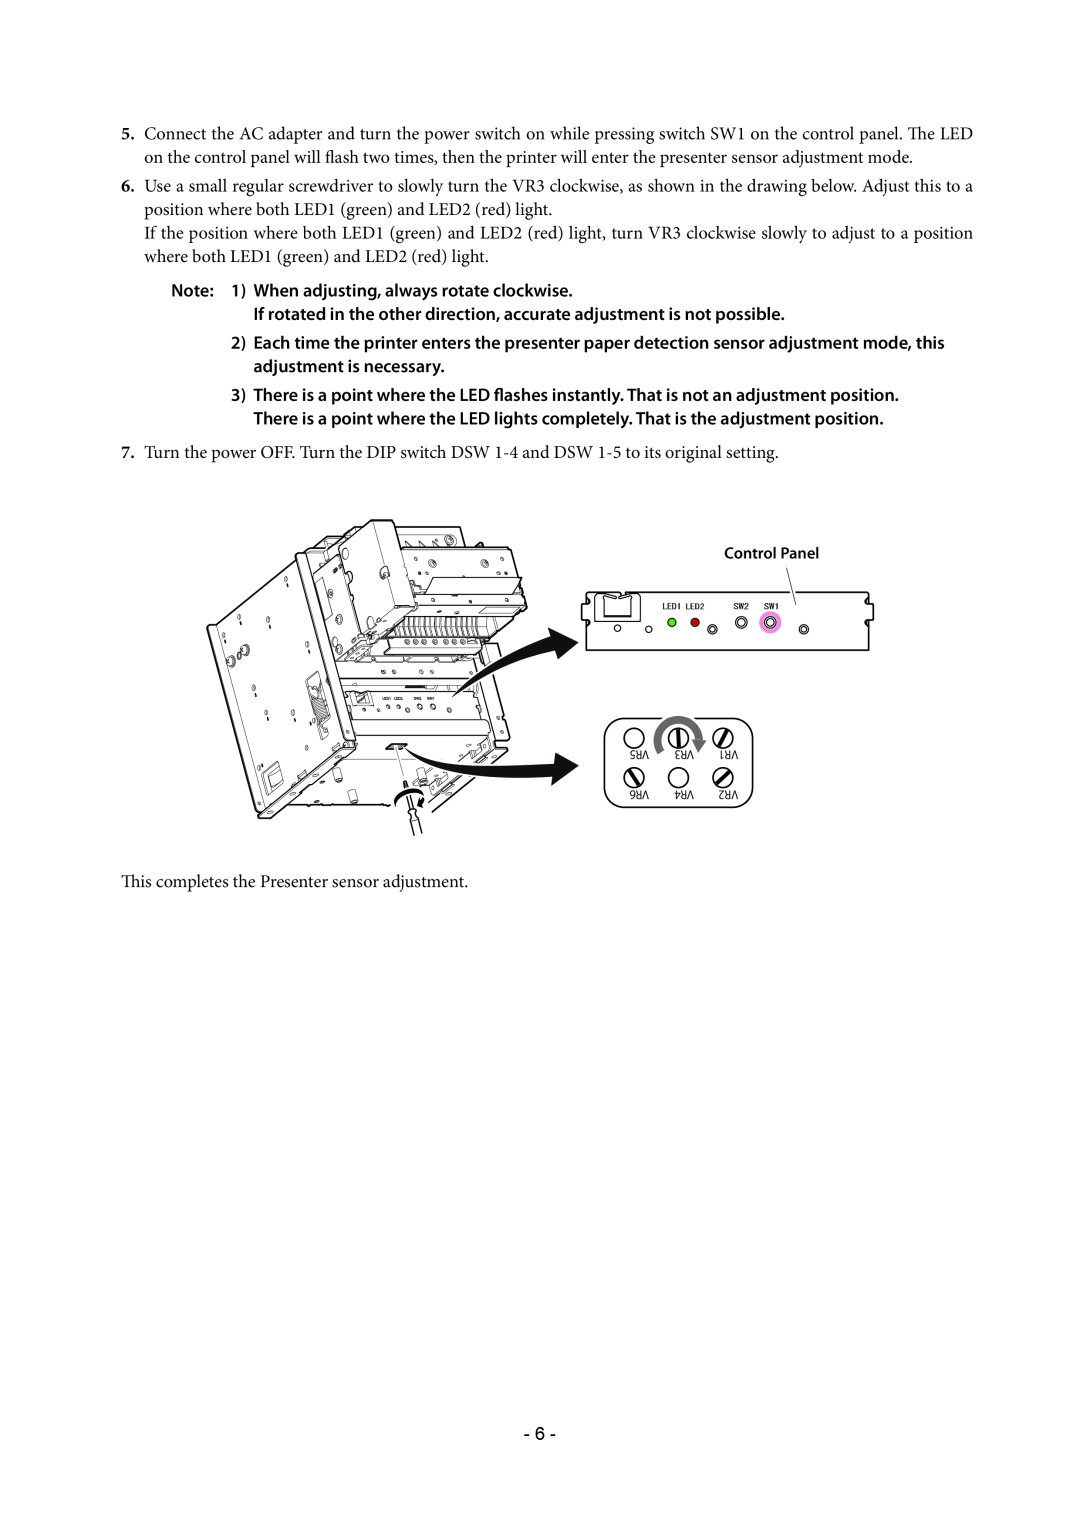 Star Micronics TUP500 technical manual Note 1 When adjusting, always rotate clockwise 